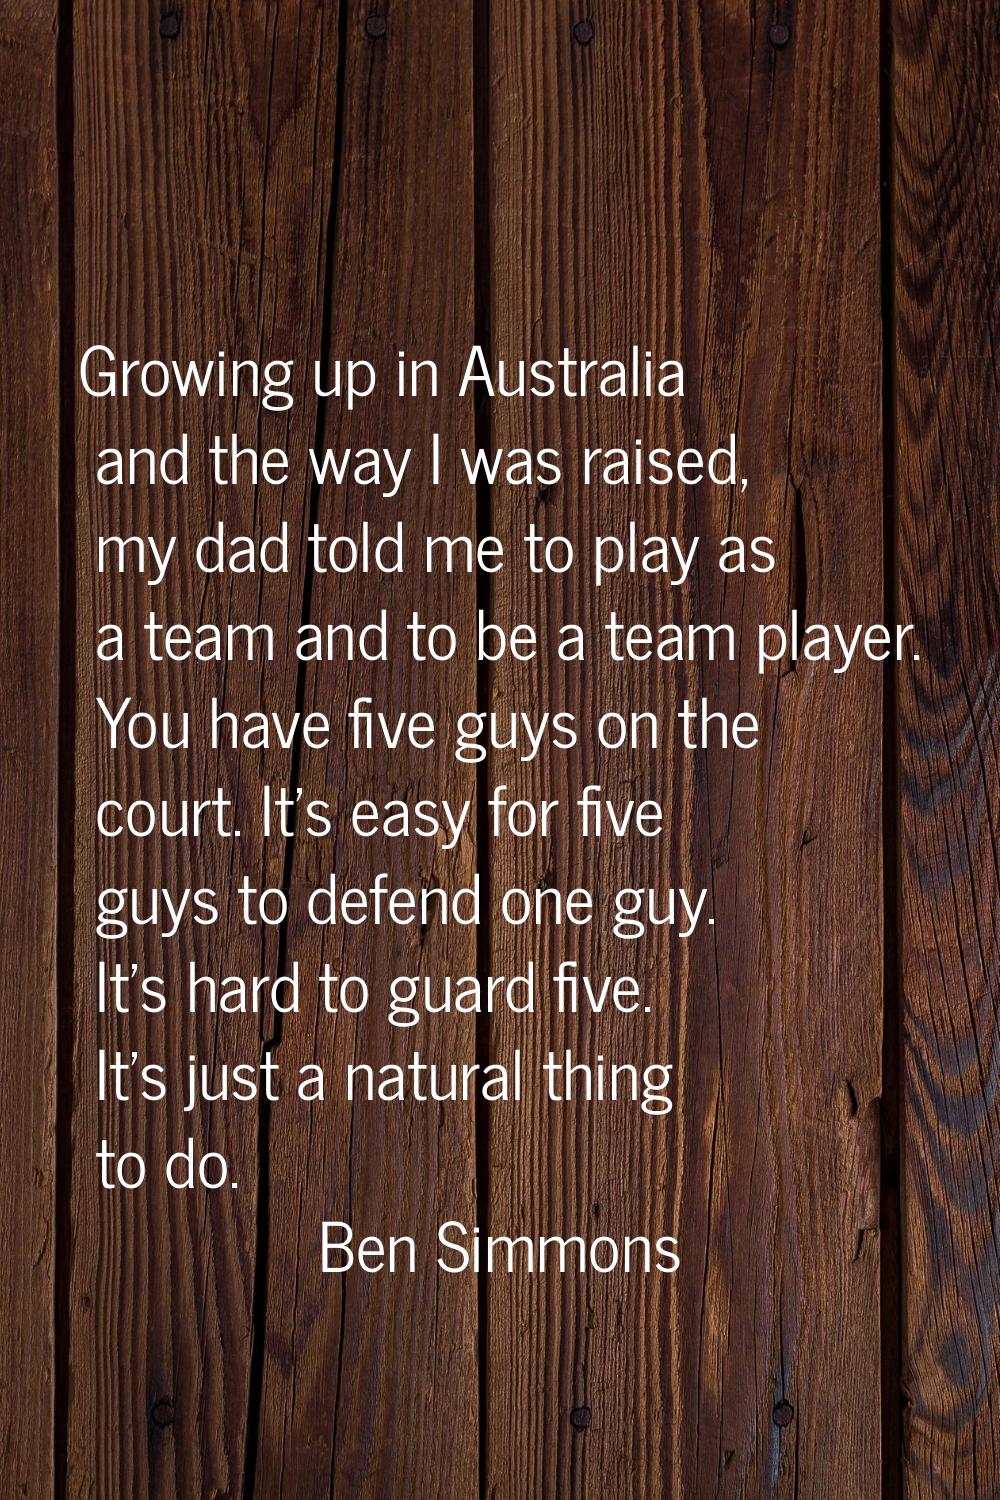 Growing up in Australia and the way I was raised, my dad told me to play as a team and to be a team